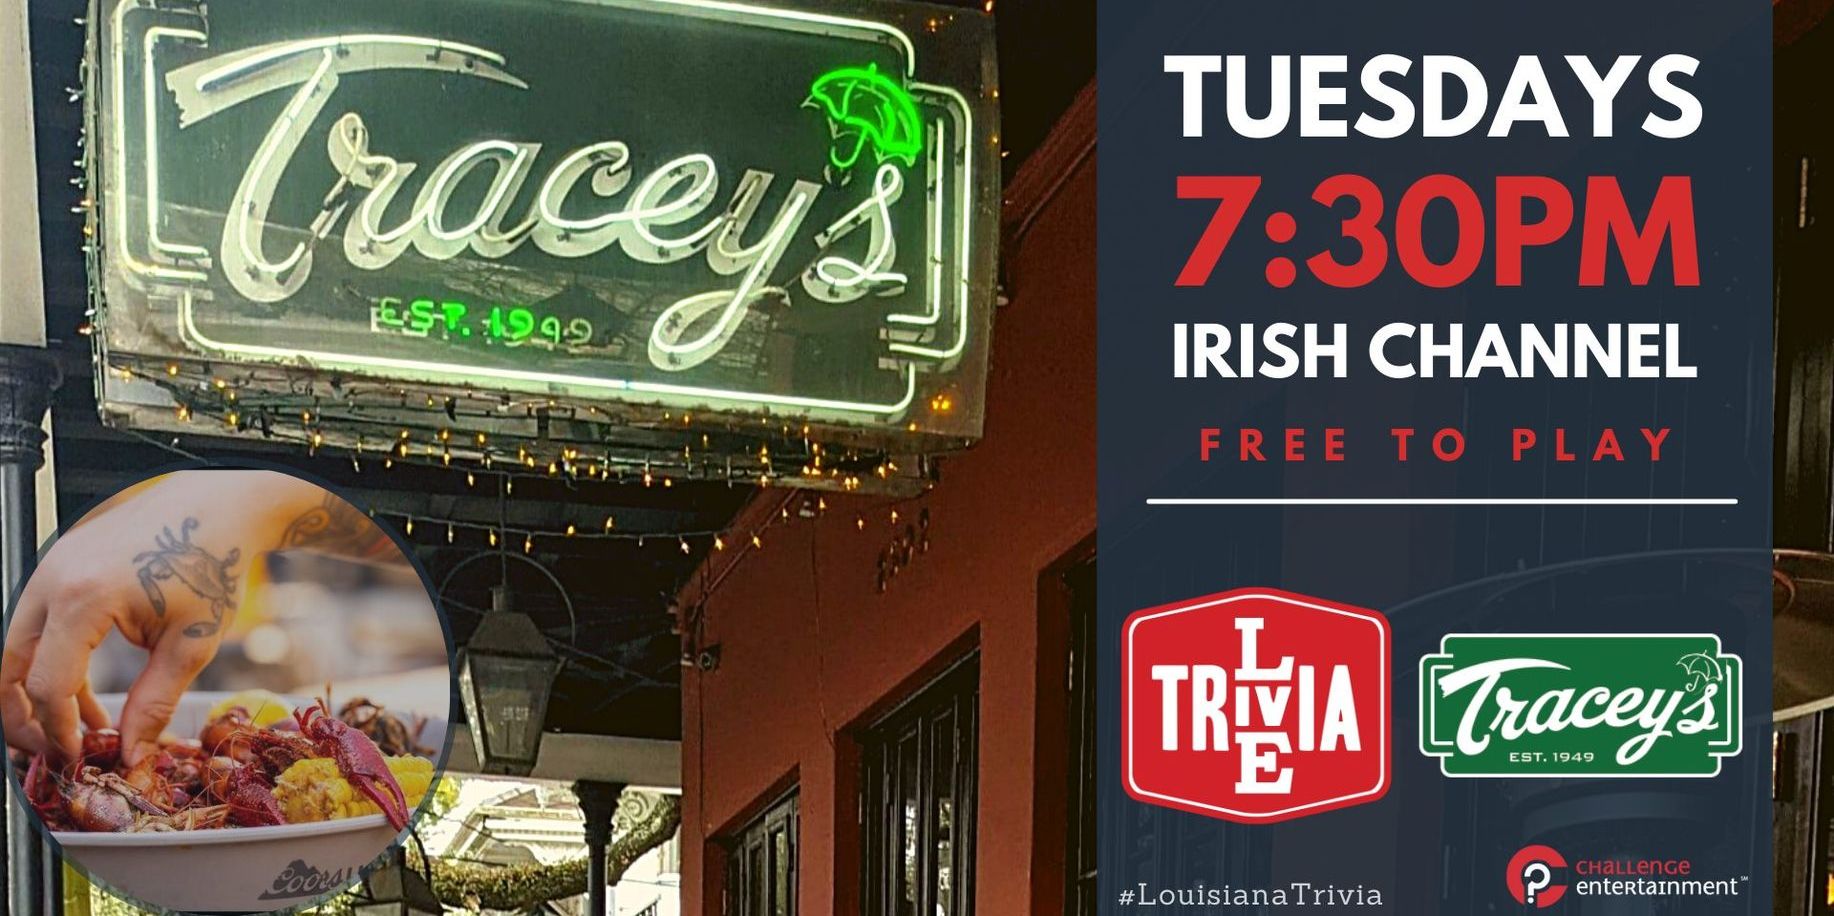 Live Trivia at Tracey's promotional image